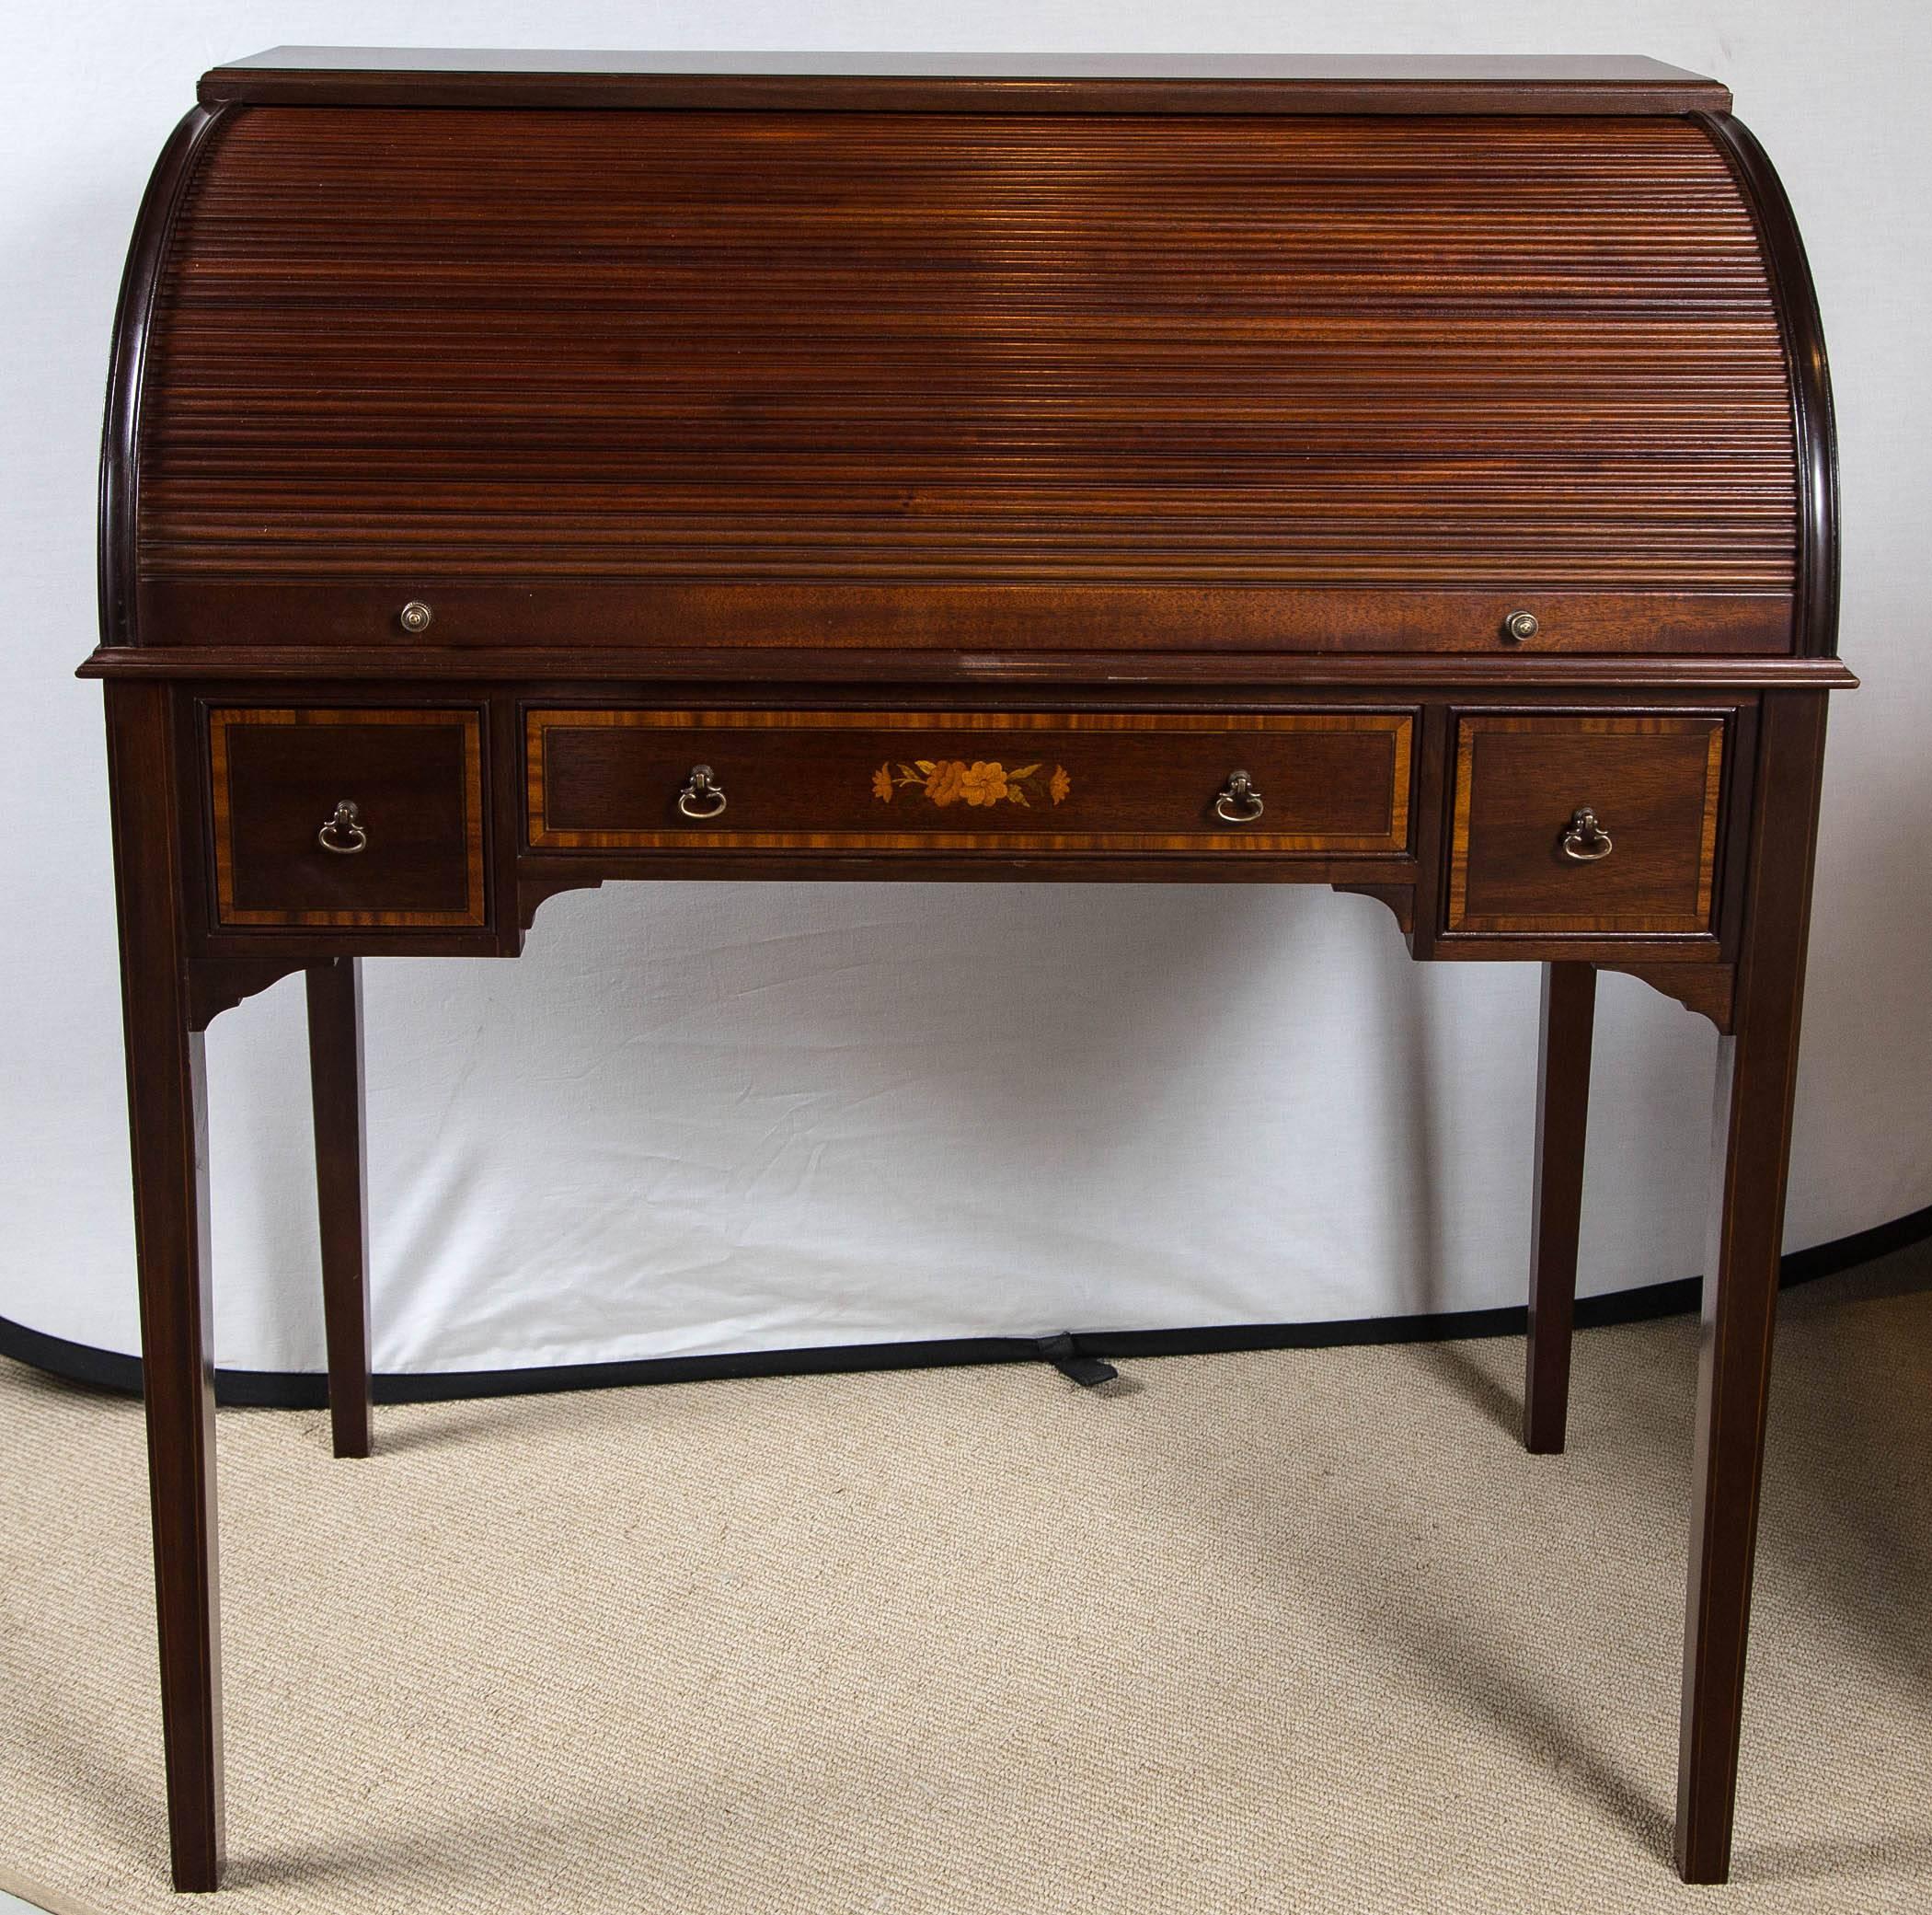 English mahogany cylinder desk with inlay and pull-out tooled leather writing surface, circa 1900